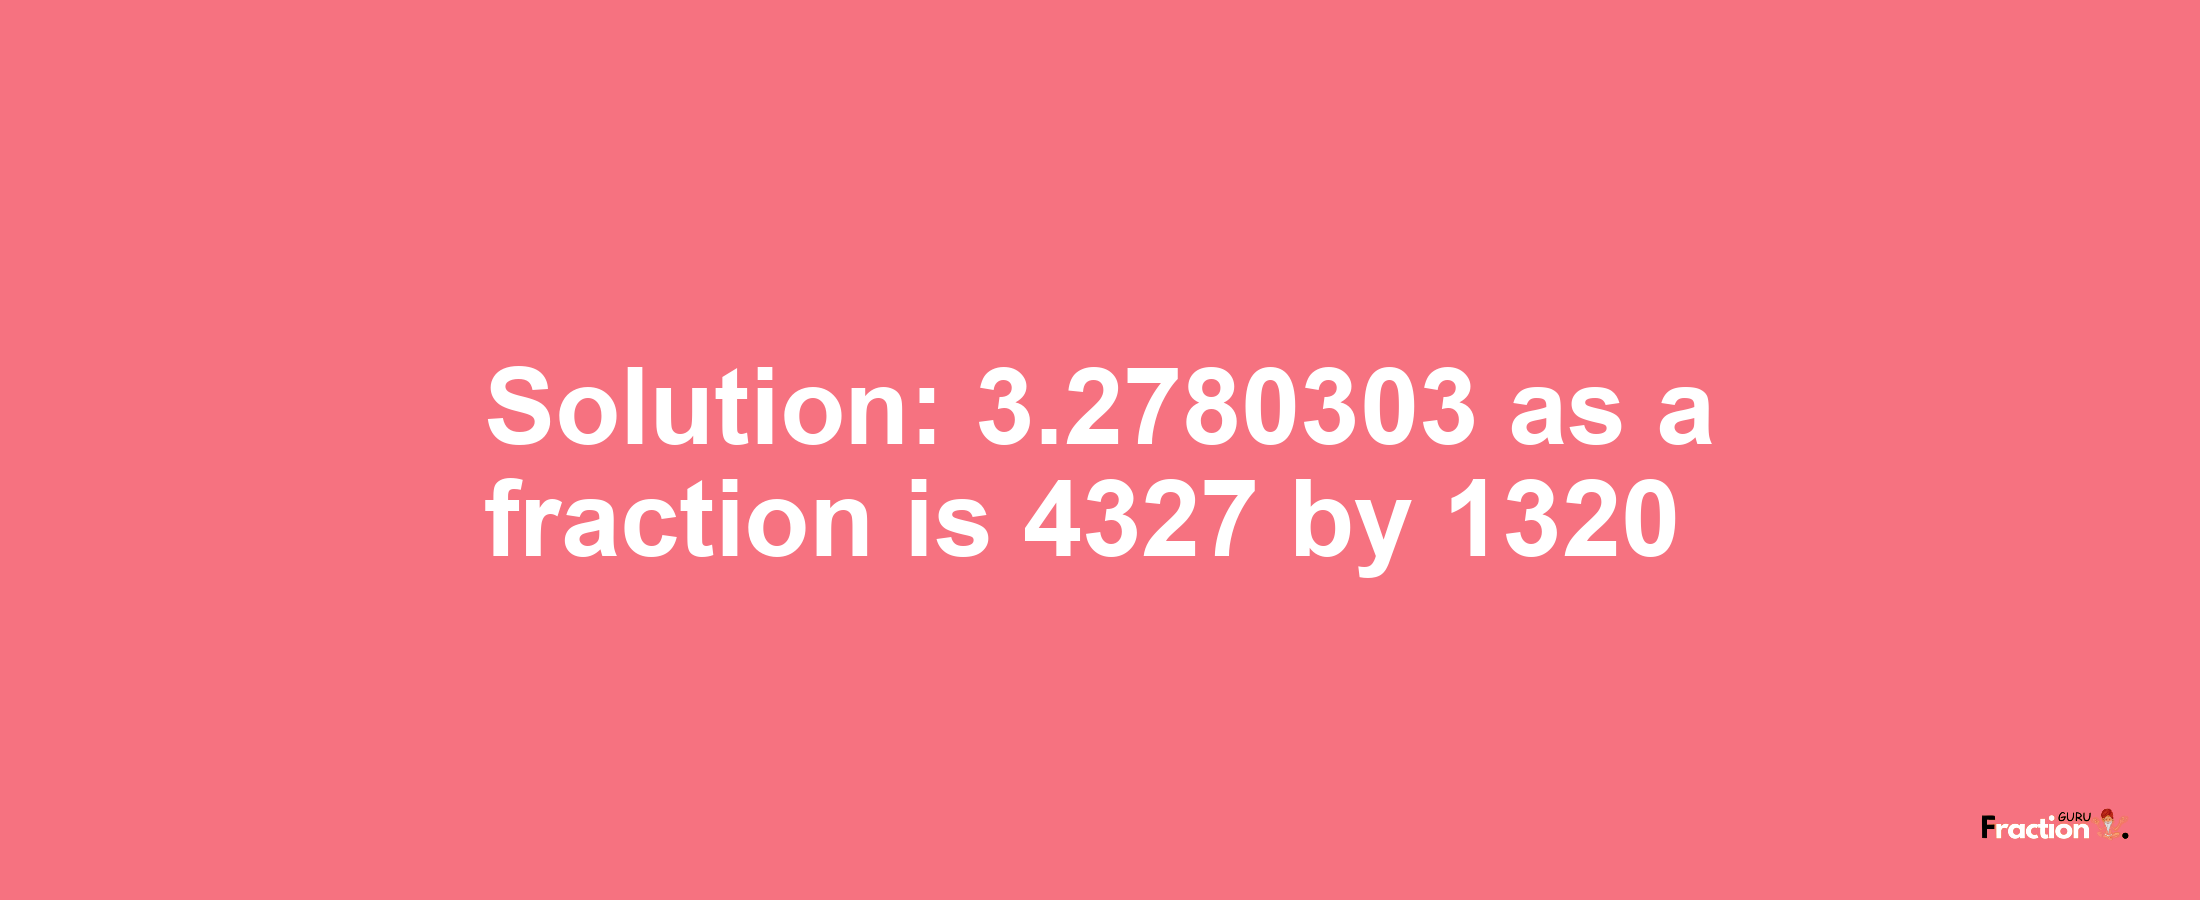 Solution:3.2780303 as a fraction is 4327/1320